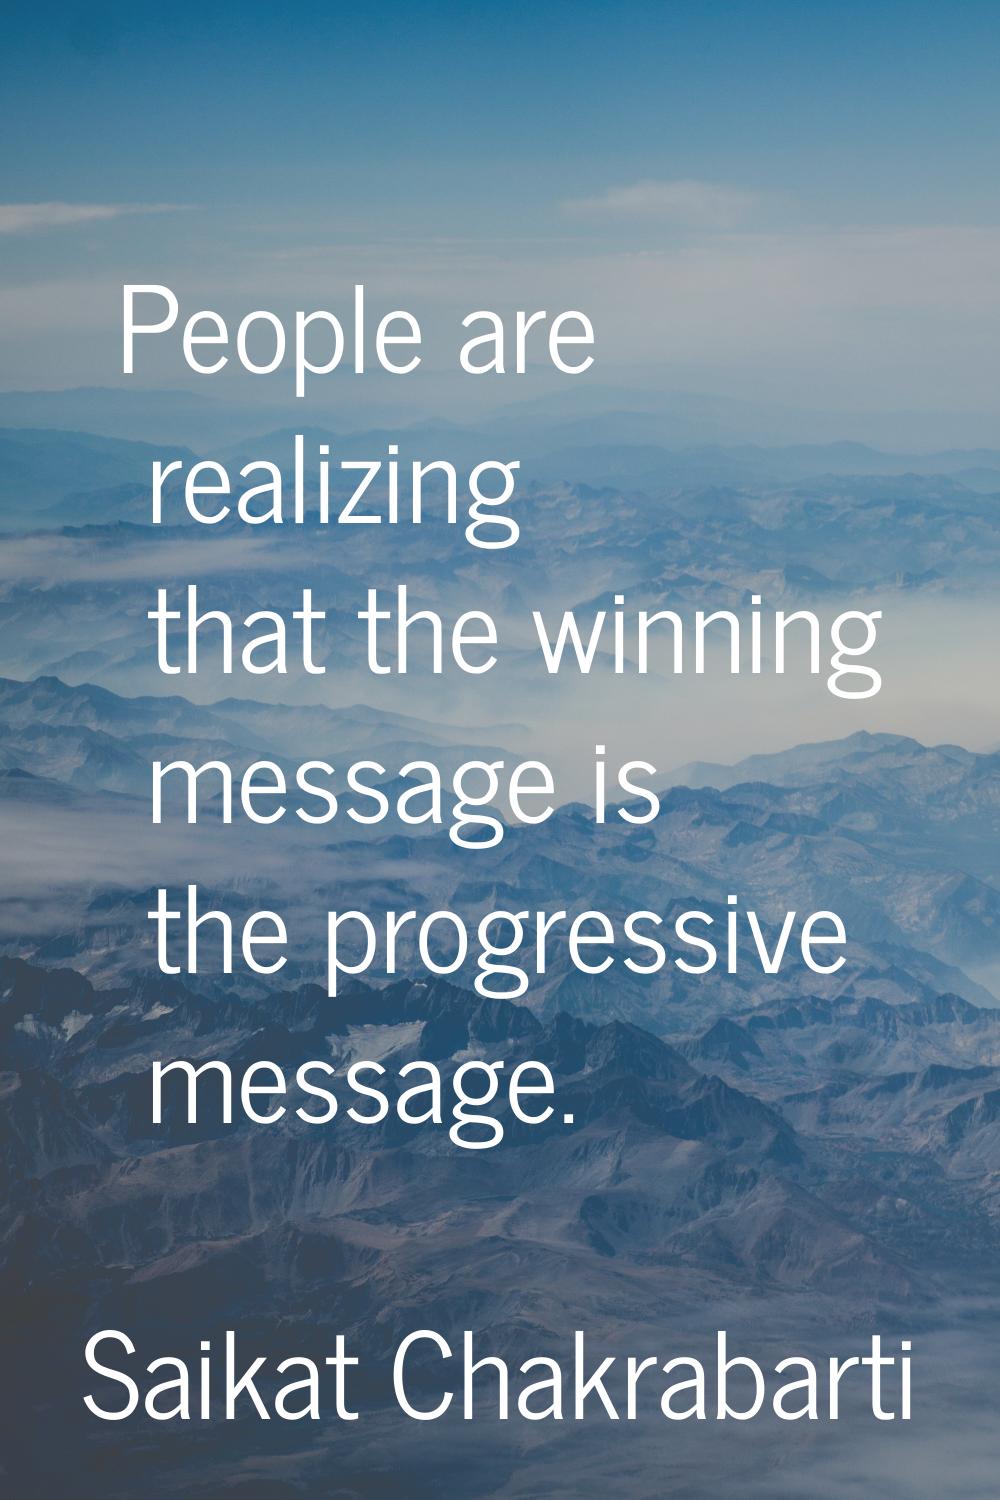 People are realizing that the winning message is the progressive message.